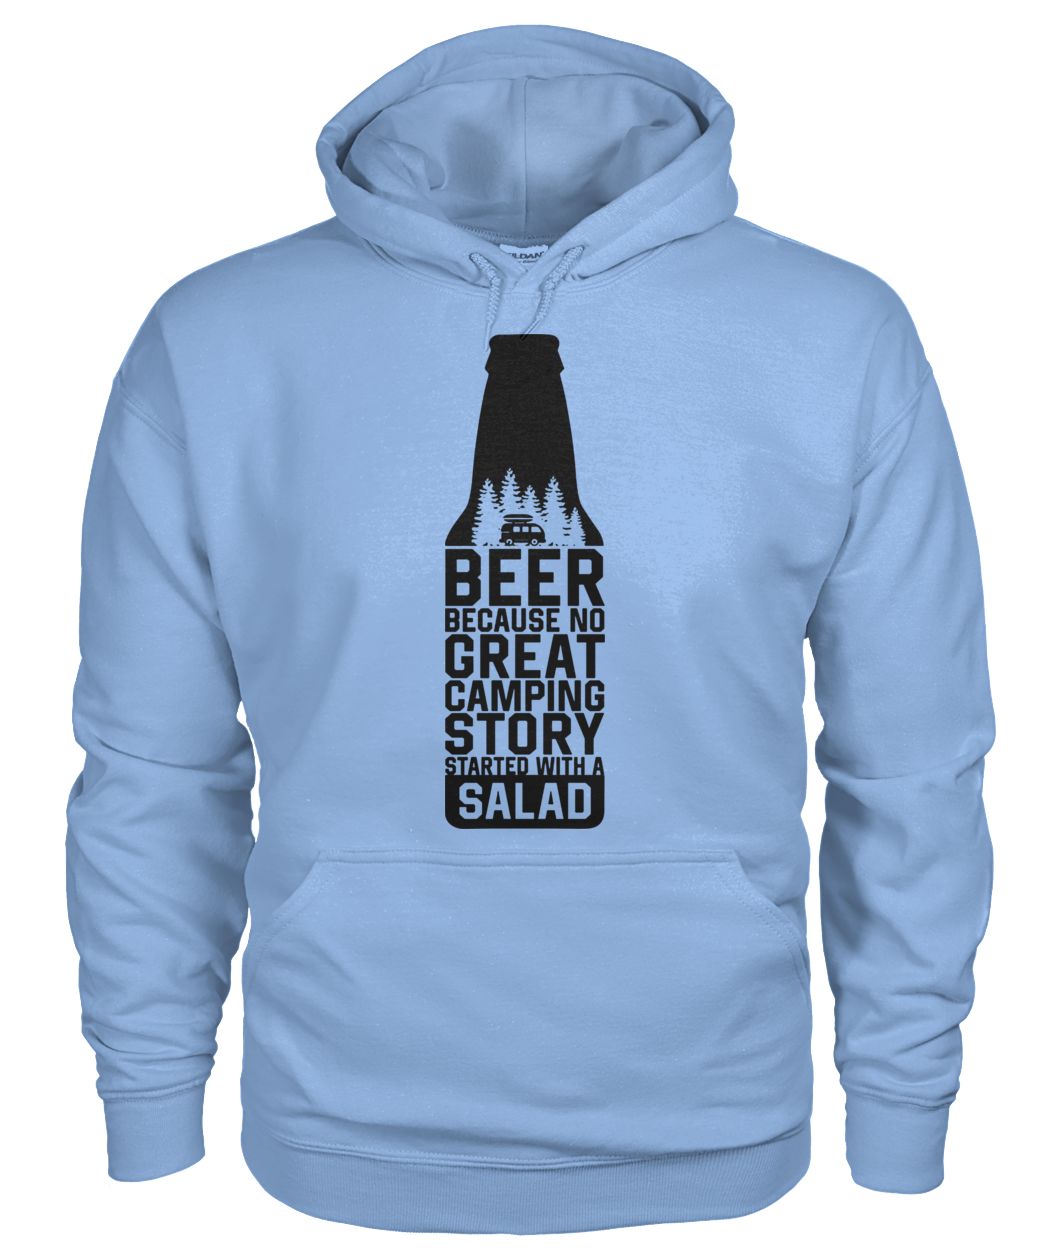 Beer because no great camping story started with a salad gildan hoodie